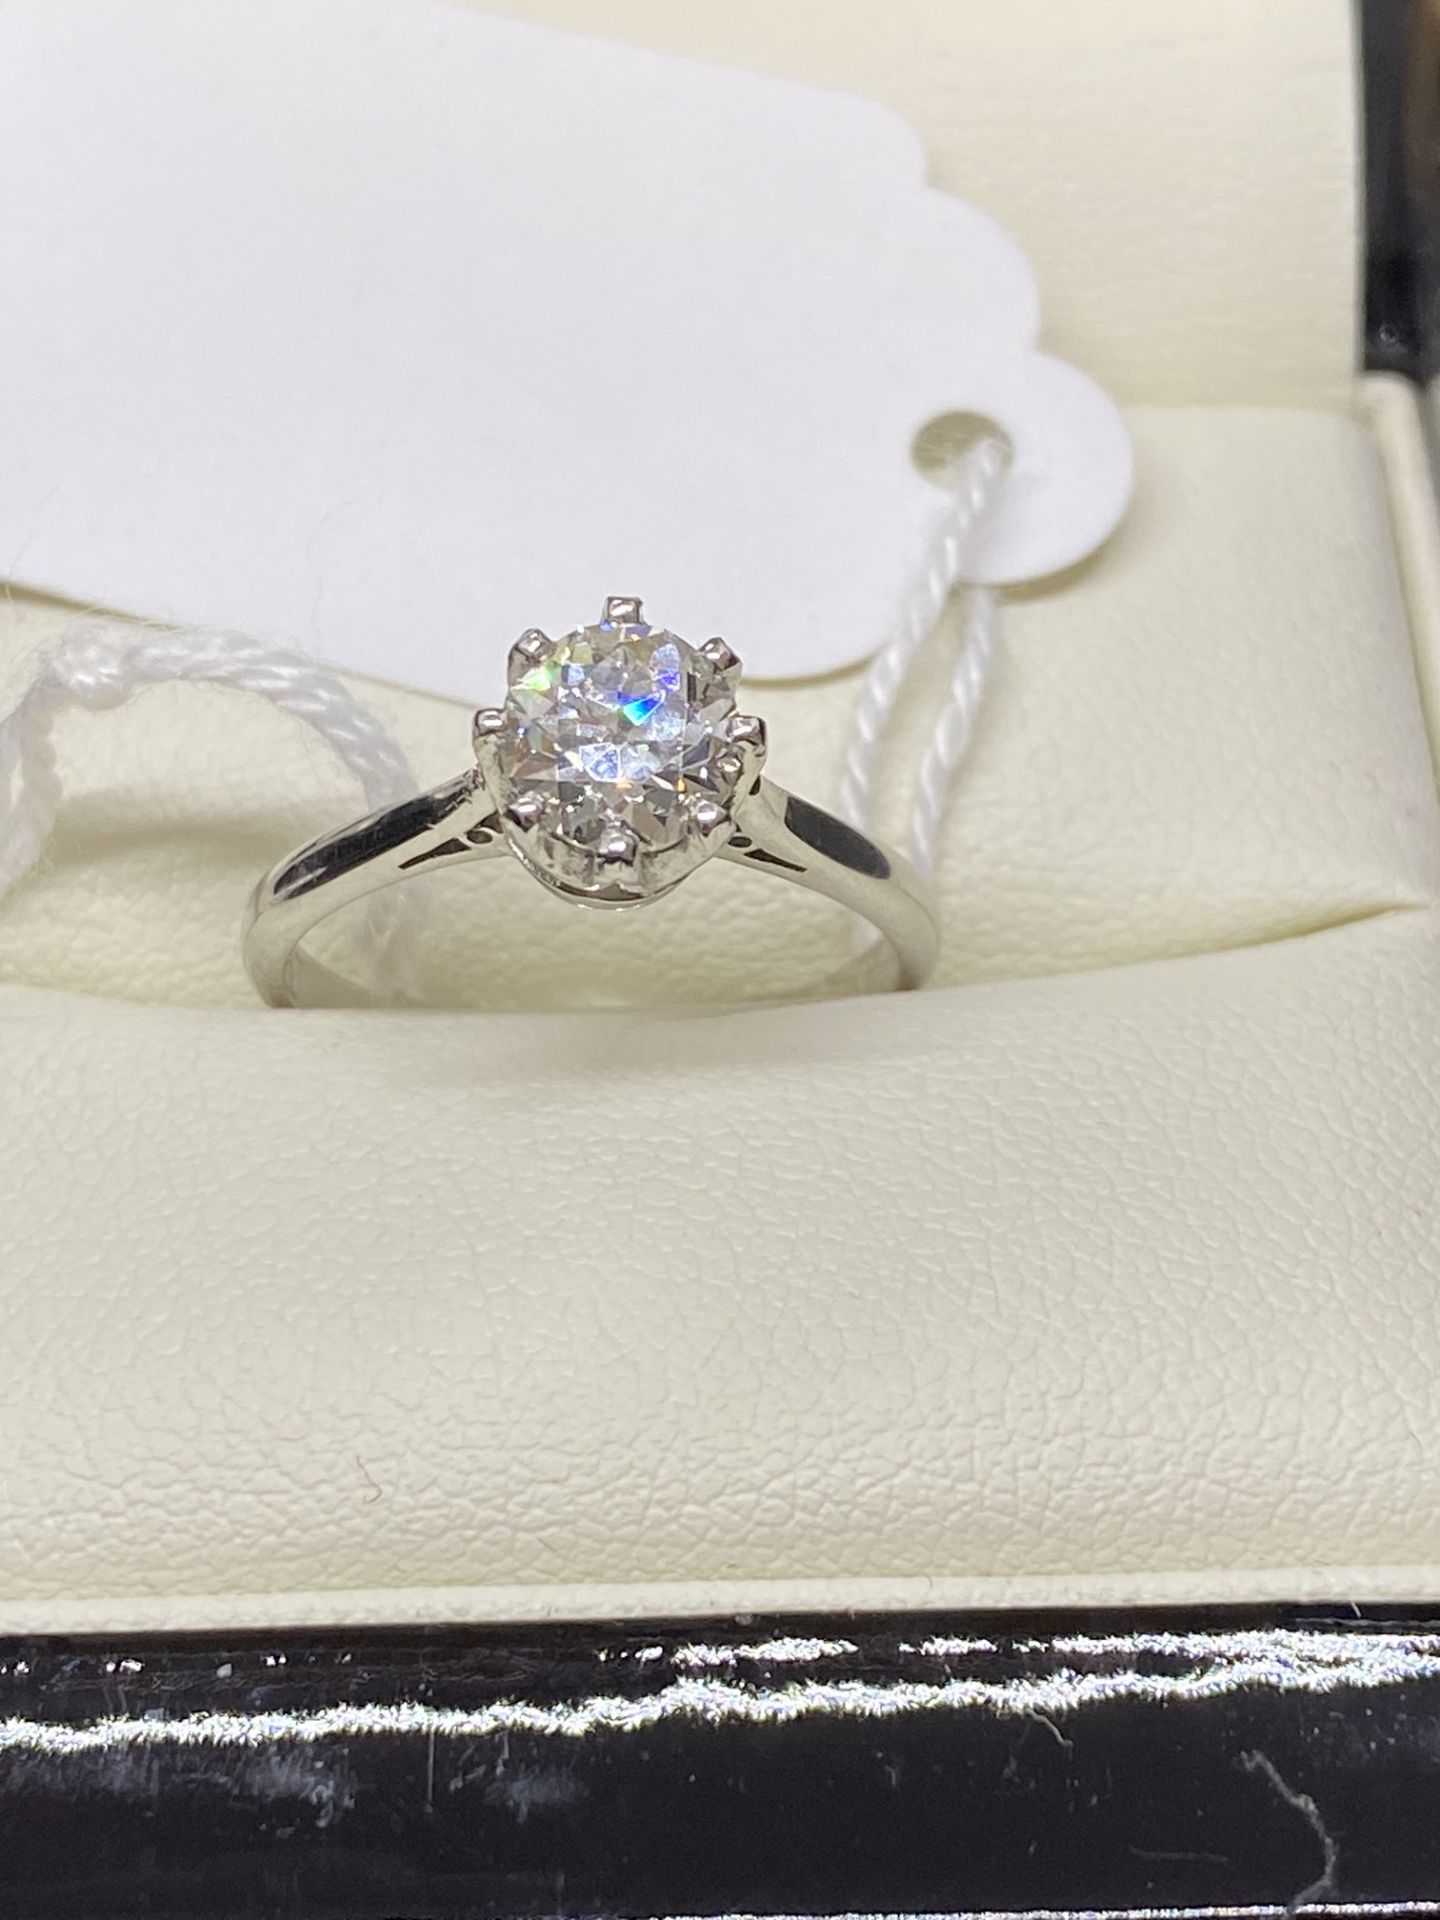 18ct WHITE GOLD 1.91ct DIAMOND SOLITAIRE RING WITH 0.35ct SIDE DIAMONDS - Image 9 of 10